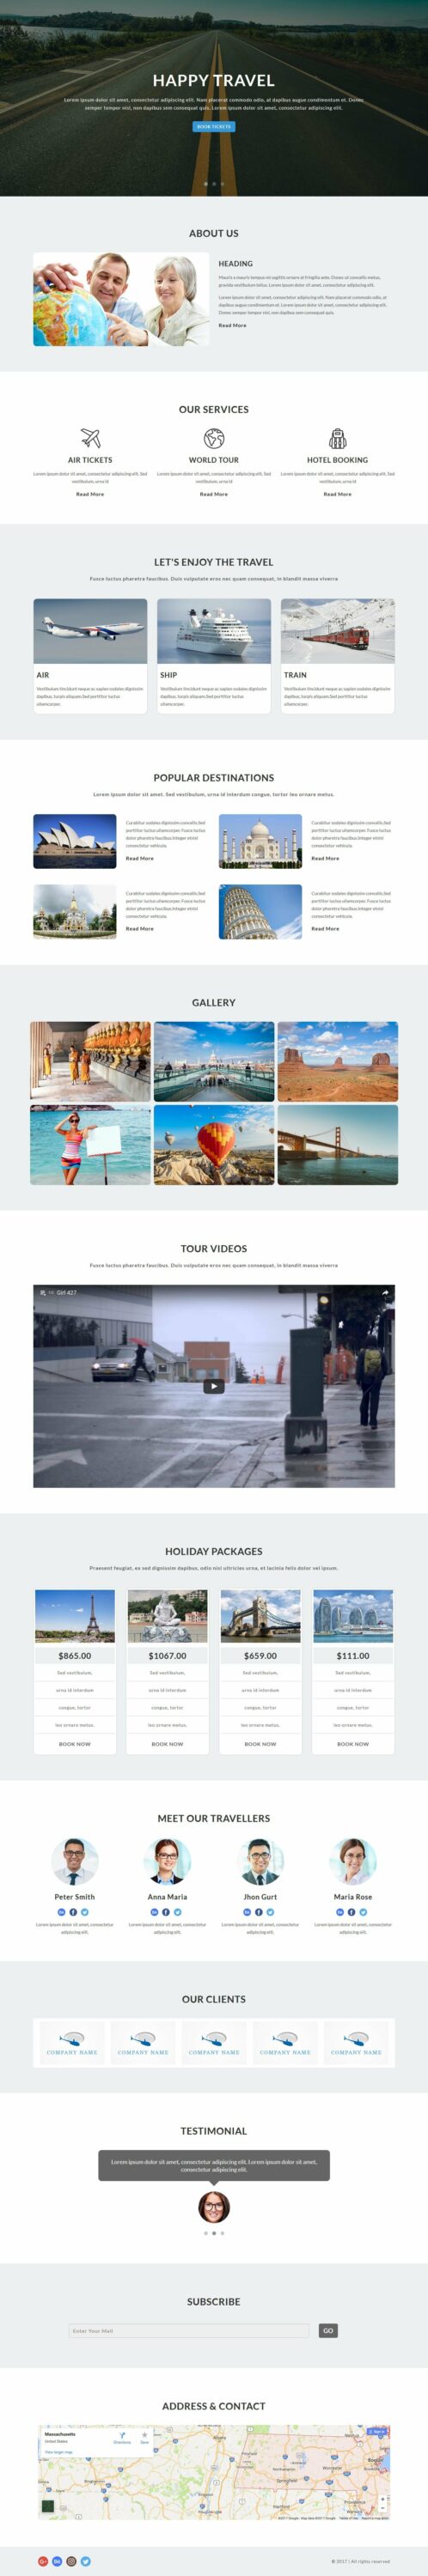 Cool landing page for your travel.